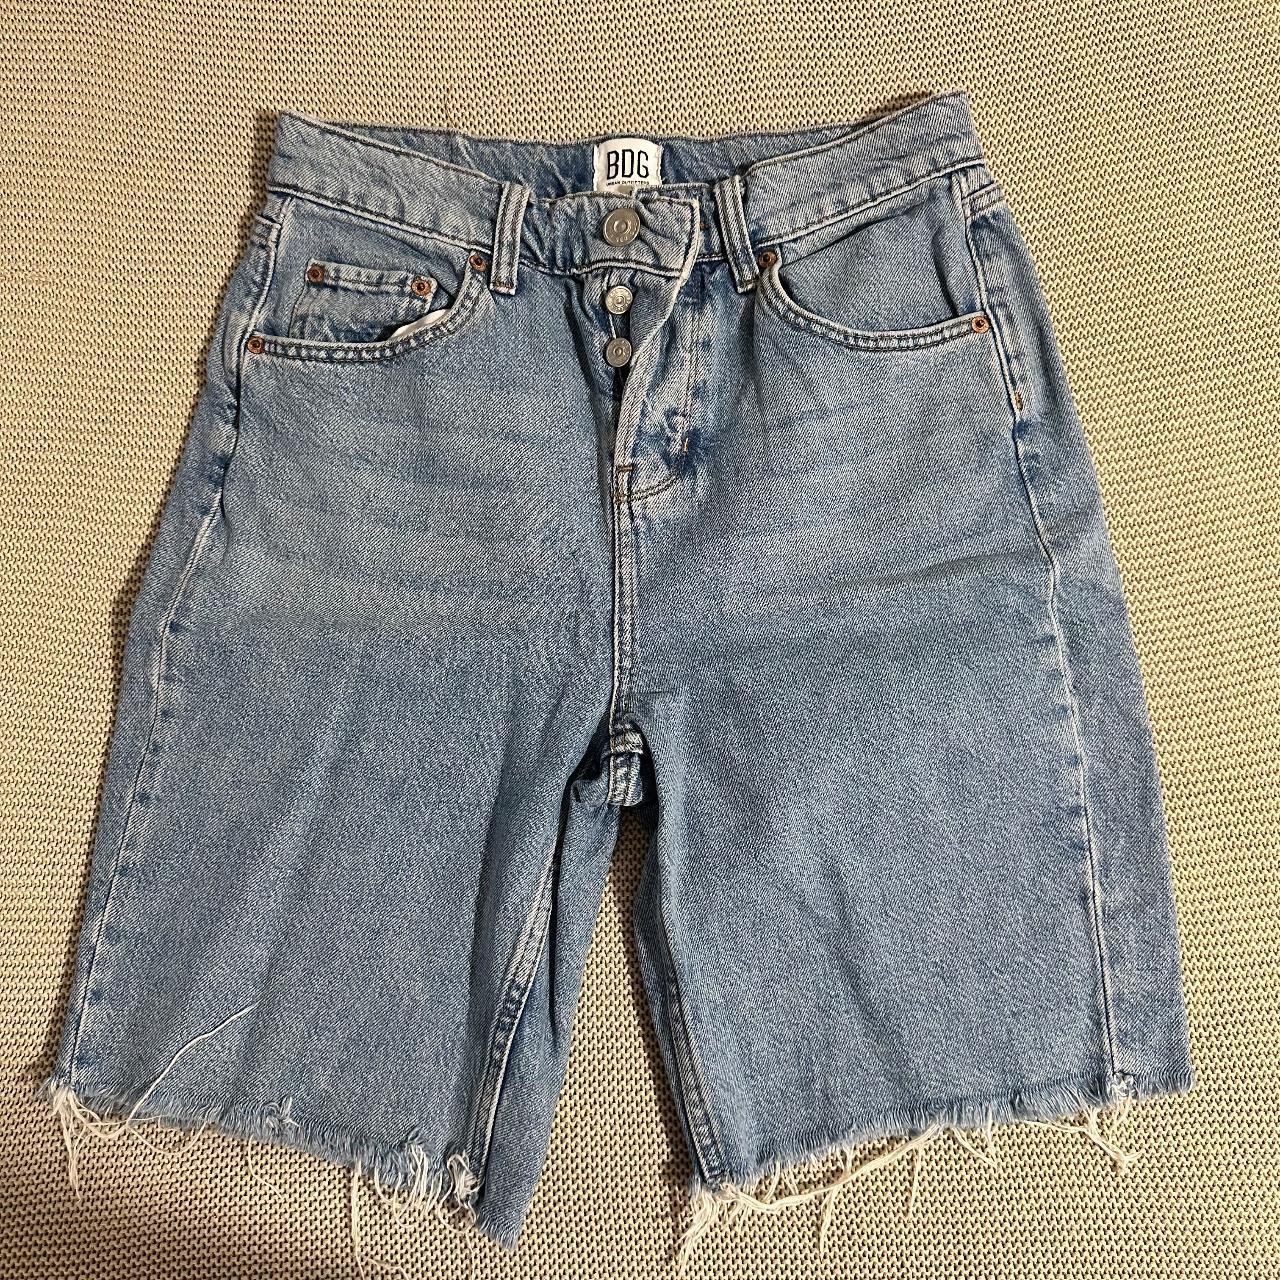 Urban outfitter Mid rise Jorts w26 - Depop